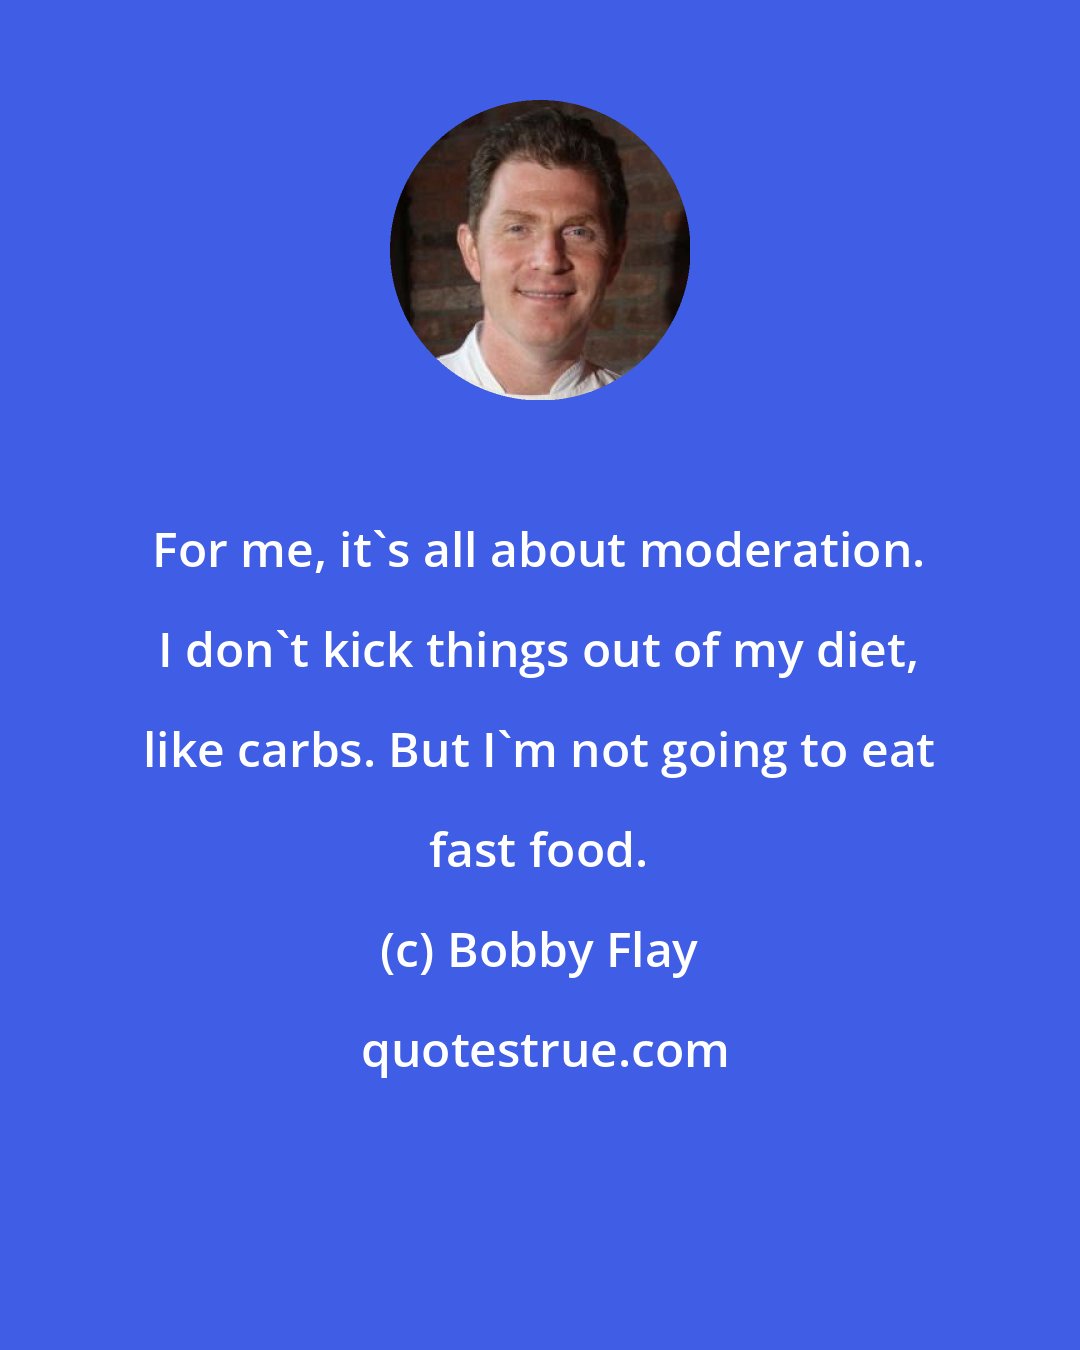 Bobby Flay: For me, it's all about moderation. I don't kick things out of my diet, like carbs. But I'm not going to eat fast food.